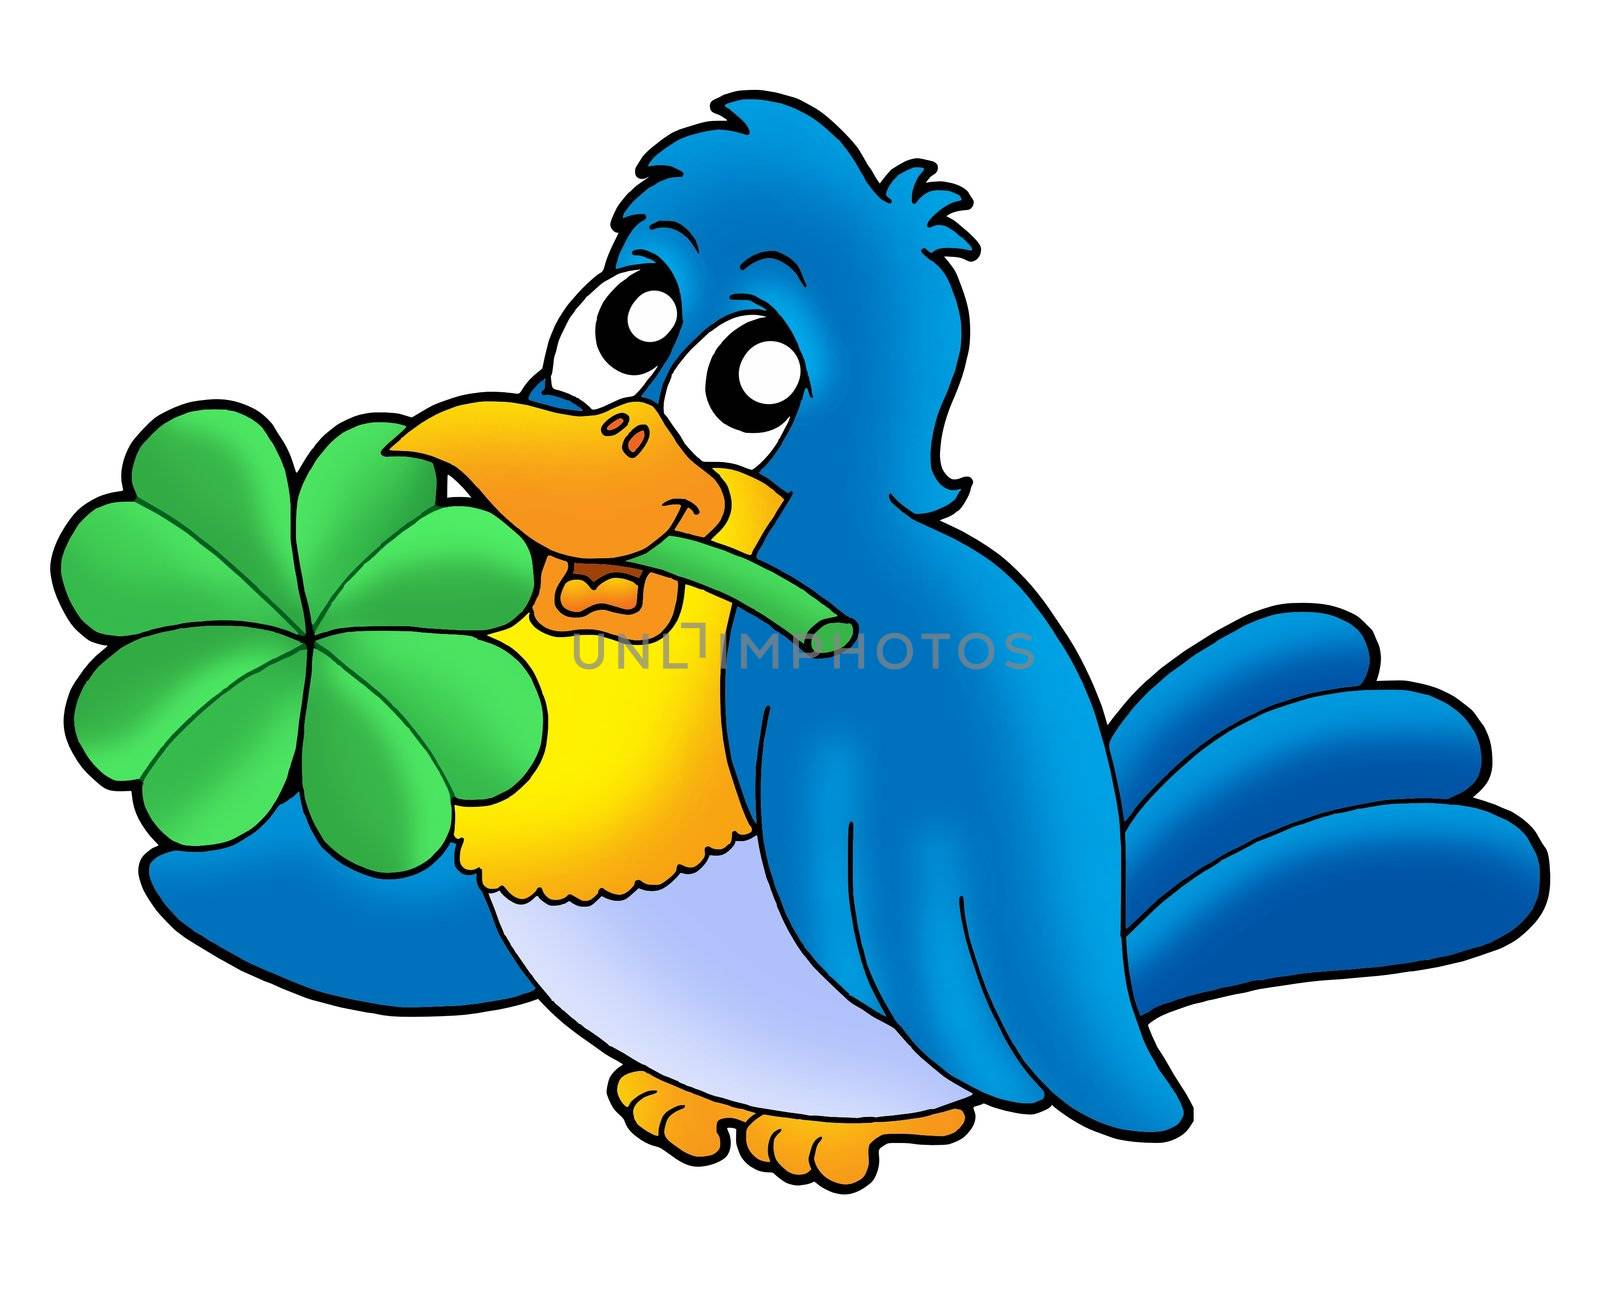 Bird with four leaves clover - color illustration.